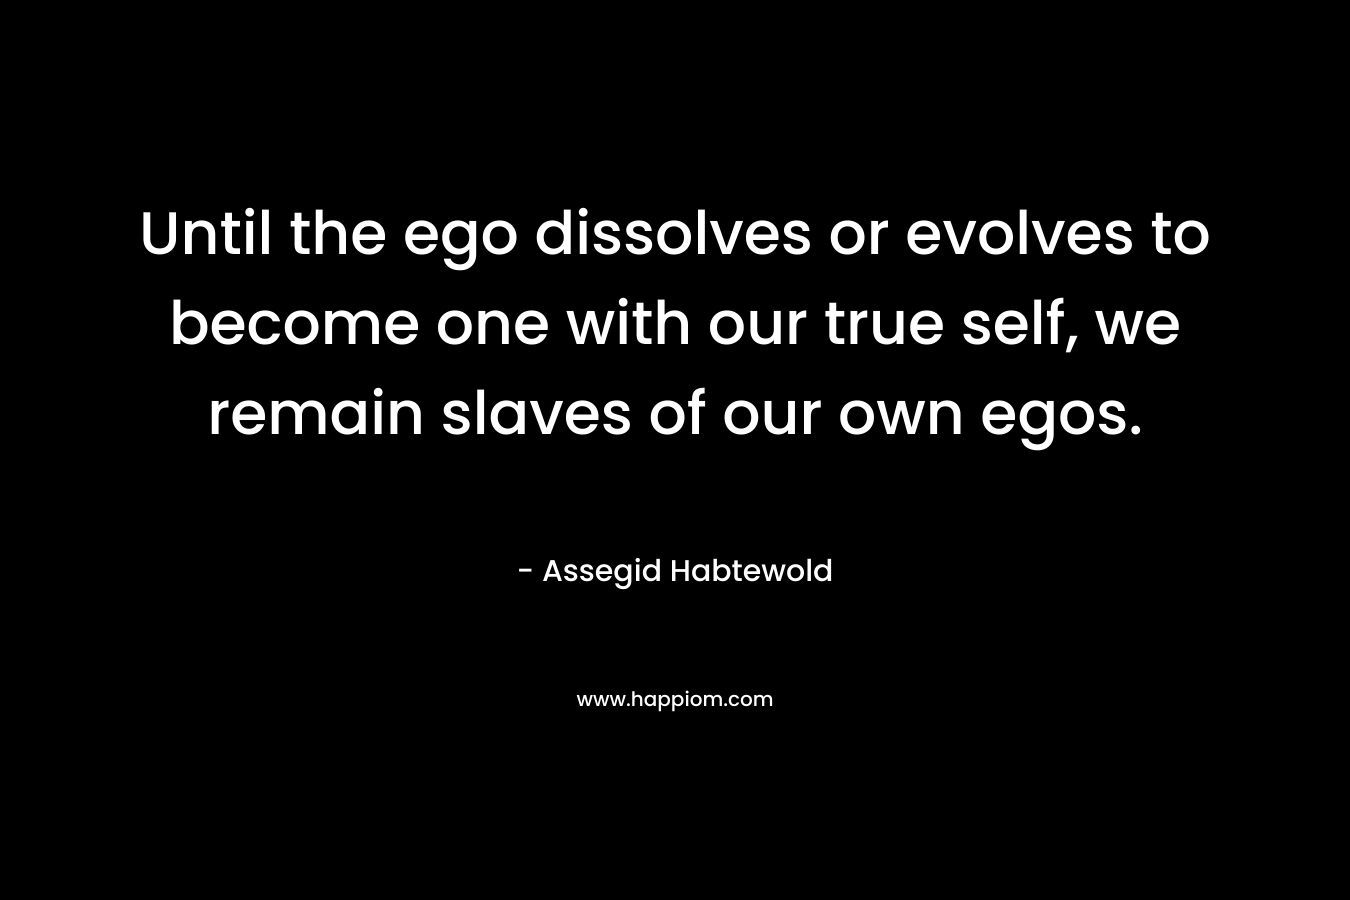 Until the ego dissolves or evolves to become one with our true self, we remain slaves of our own egos.